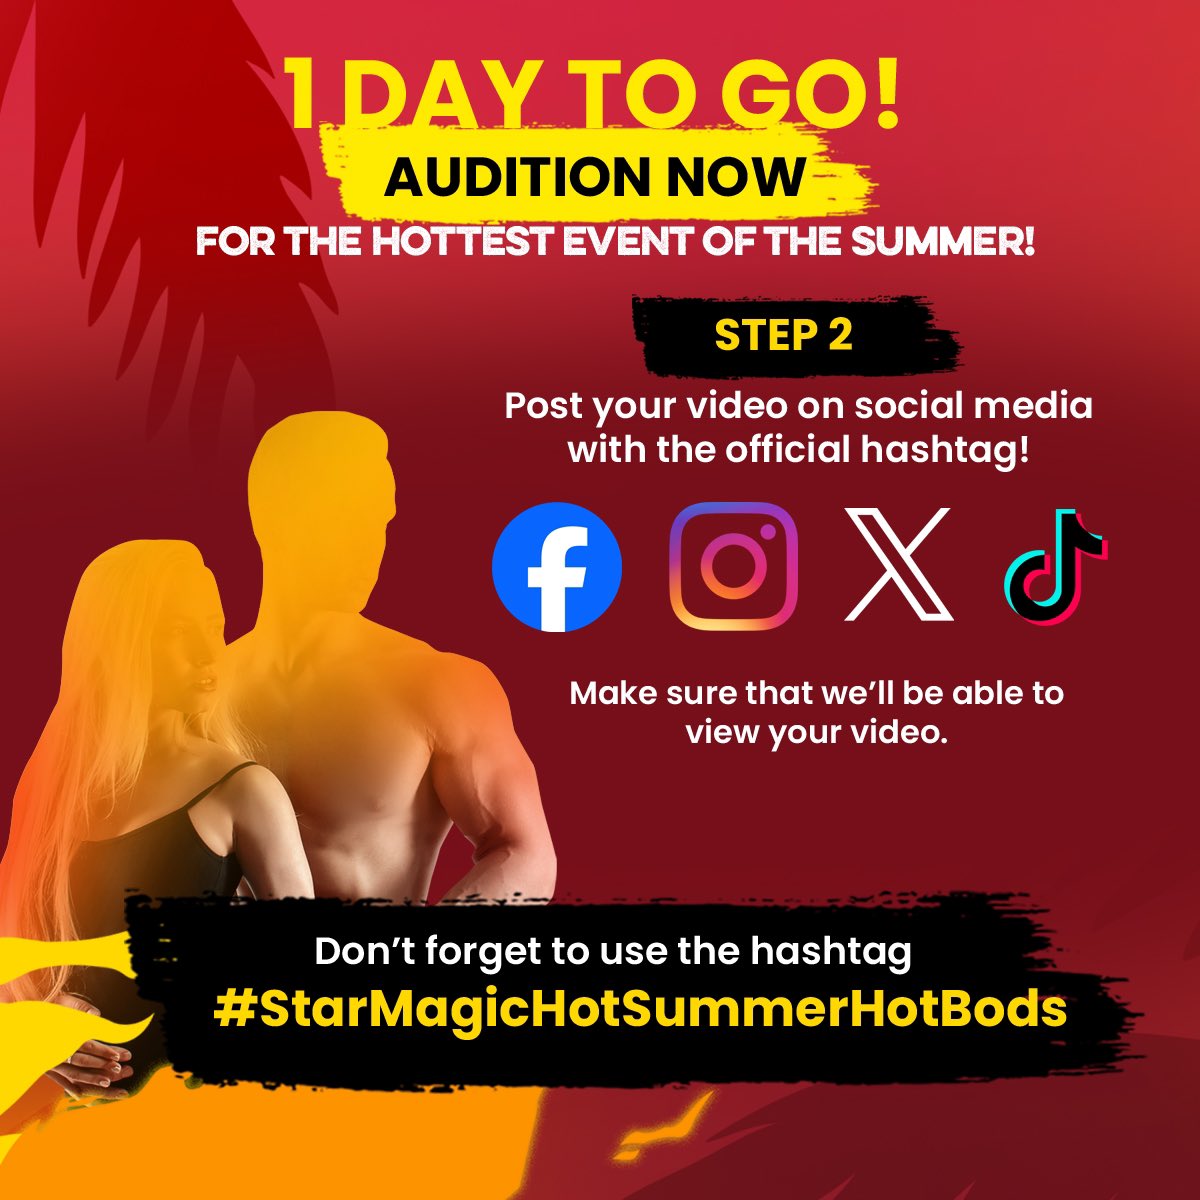 AUDITION NOW—1 DAY TO GO! 🔥

Post a video showcasing your hot bod & personality with the hashtag #StarMagicHotSummerHotBods on FB, IG, X, TikTok, and be one of the faces—and bodies—of the hottest event this May along with Star Magic artists!